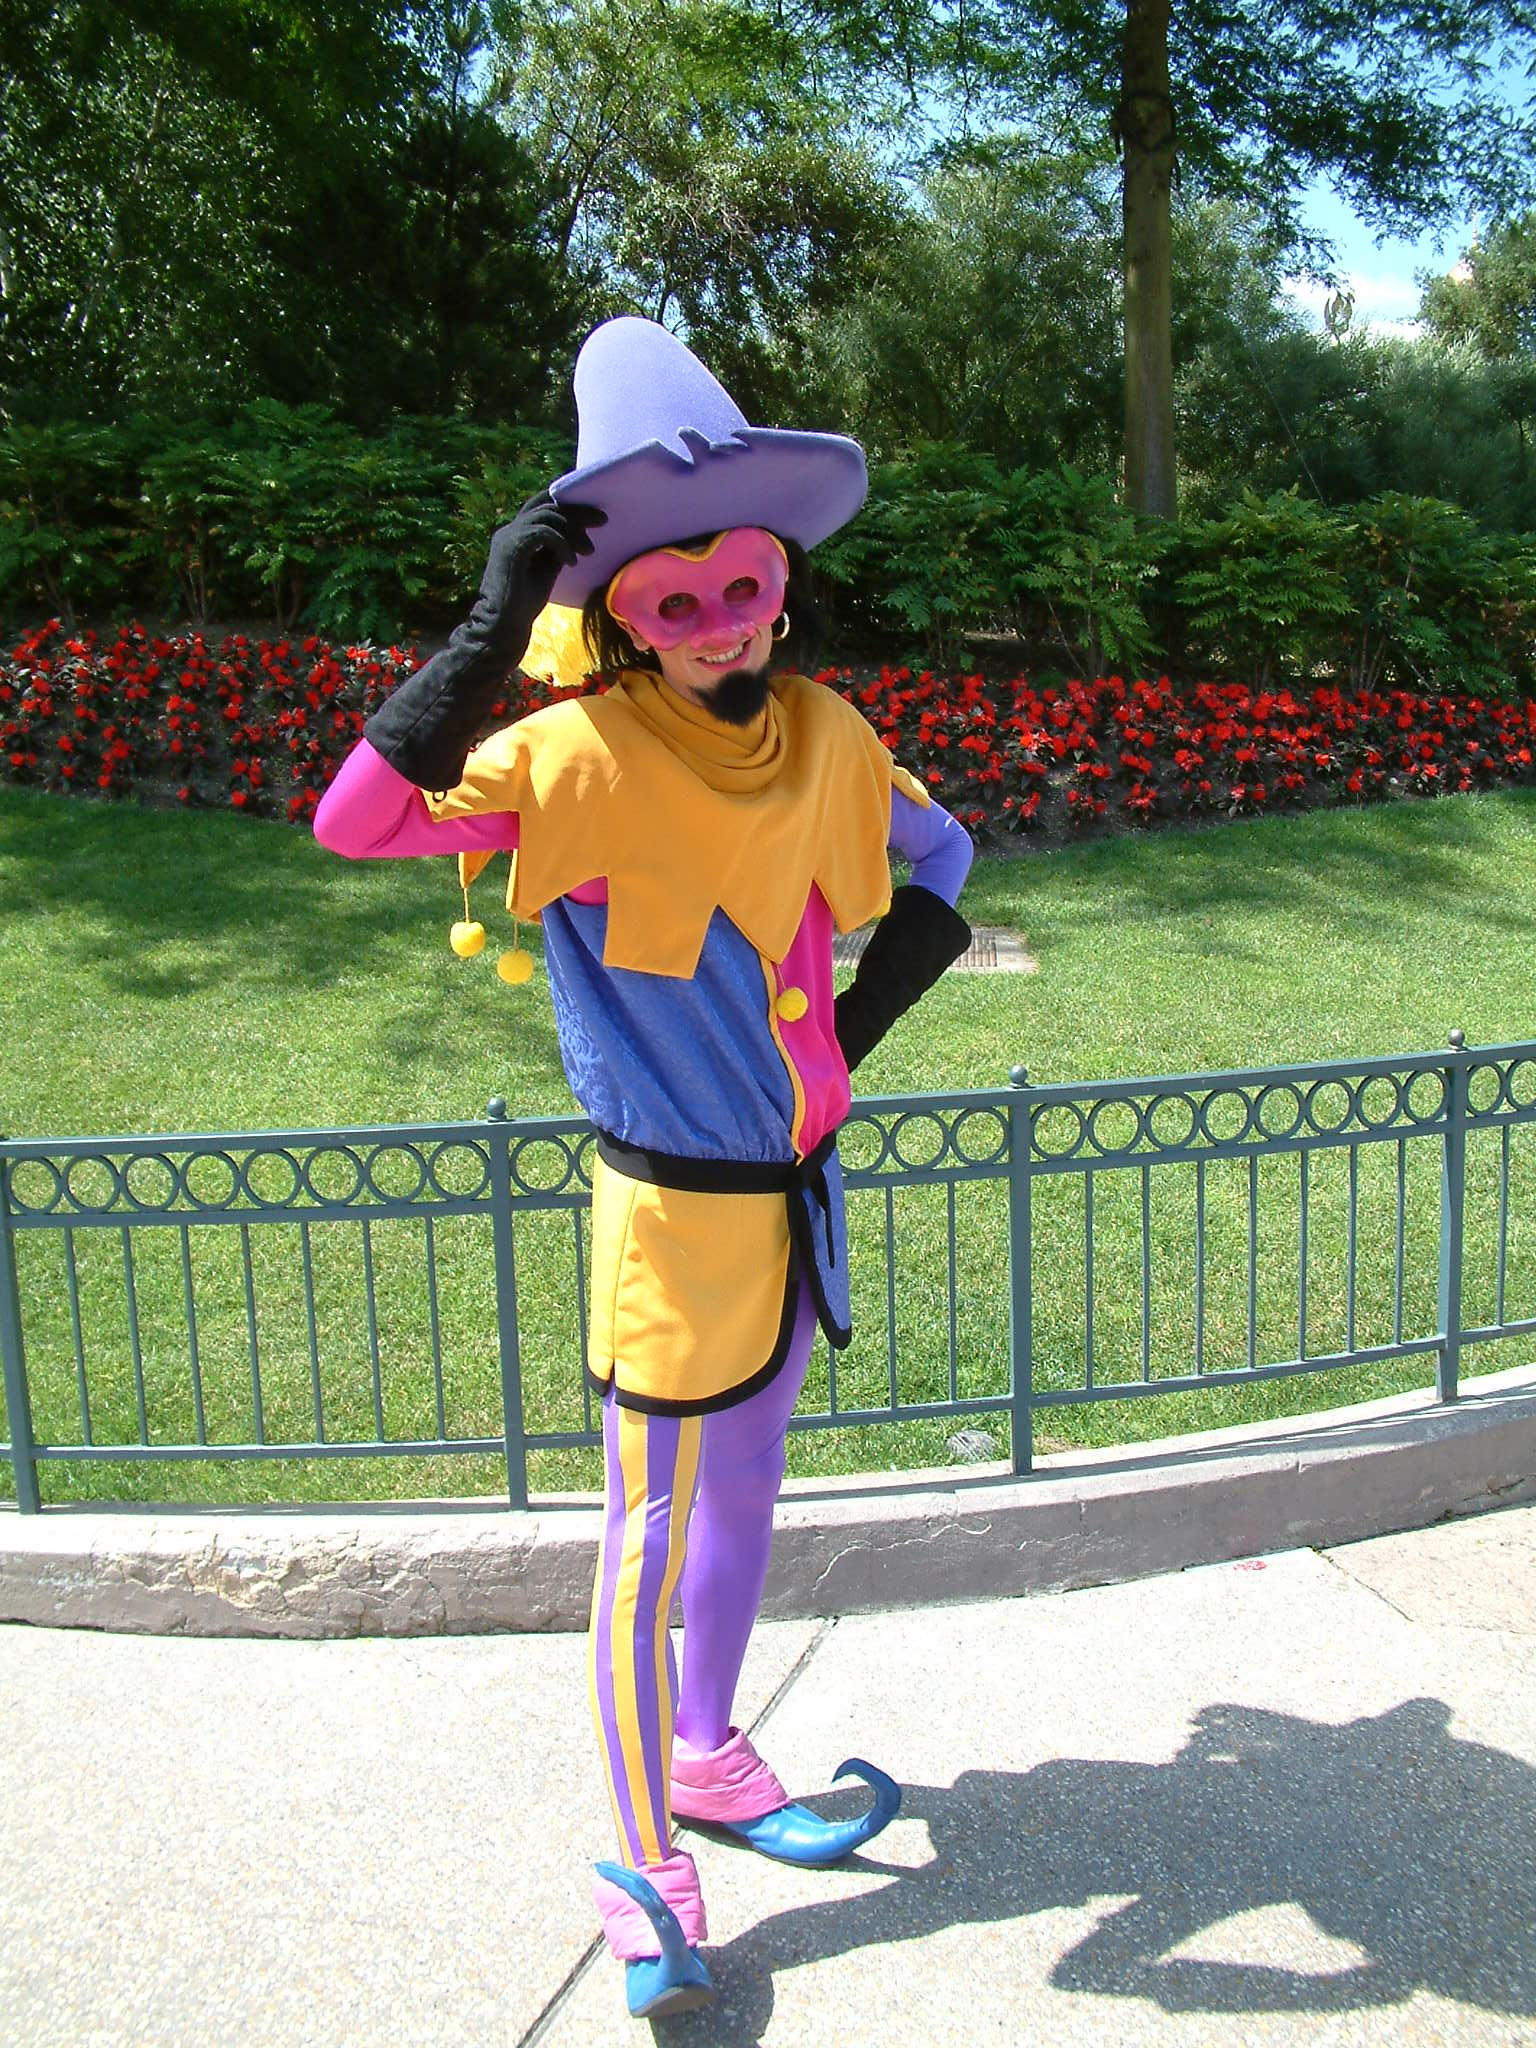 Clopin doens't come out often, but if he is out he can be found in Fantasyland most of the time.